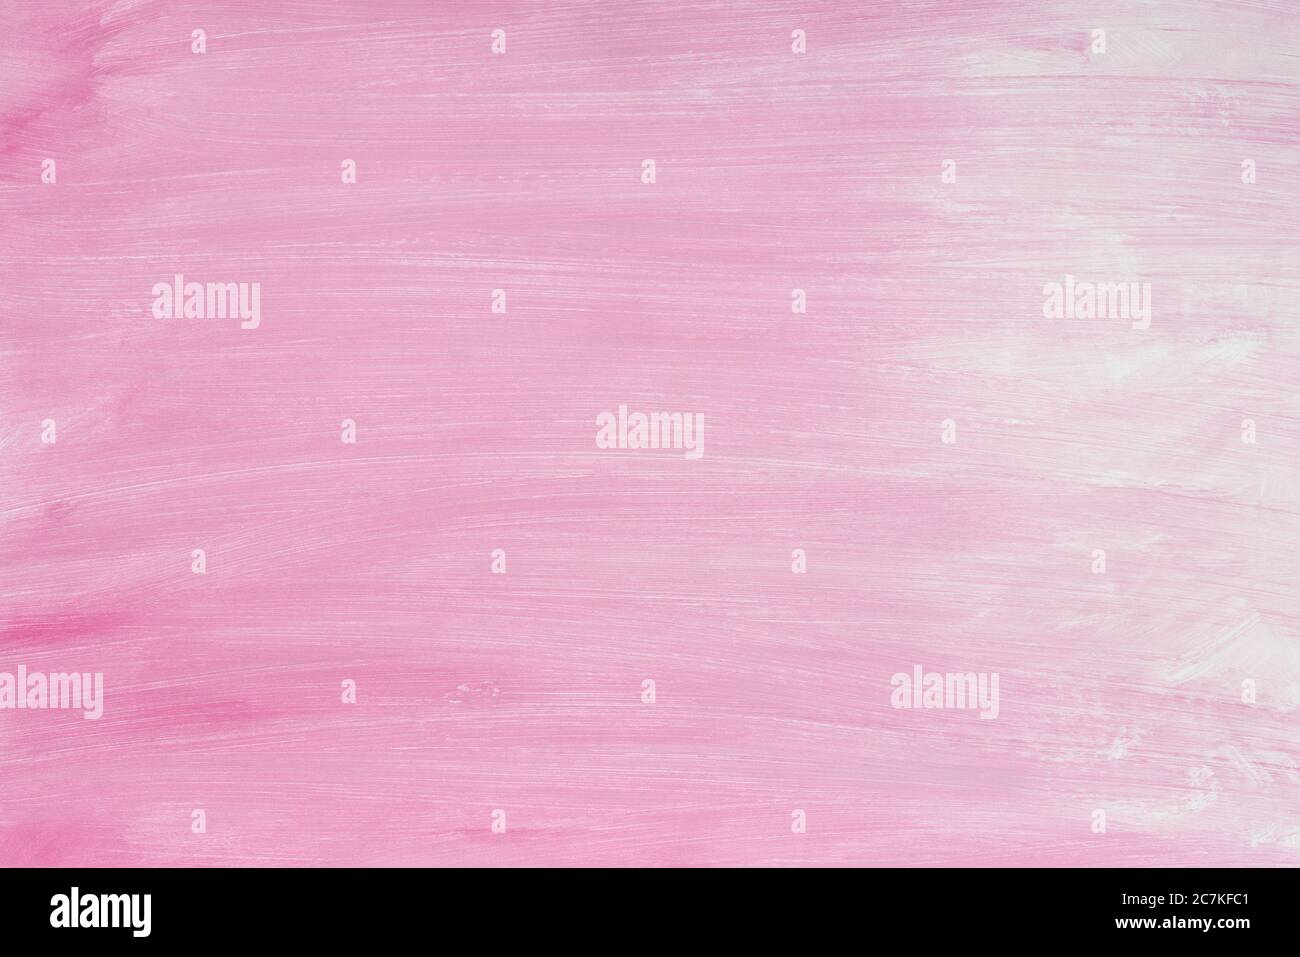 pink color painted on paper background texture Stock Photo